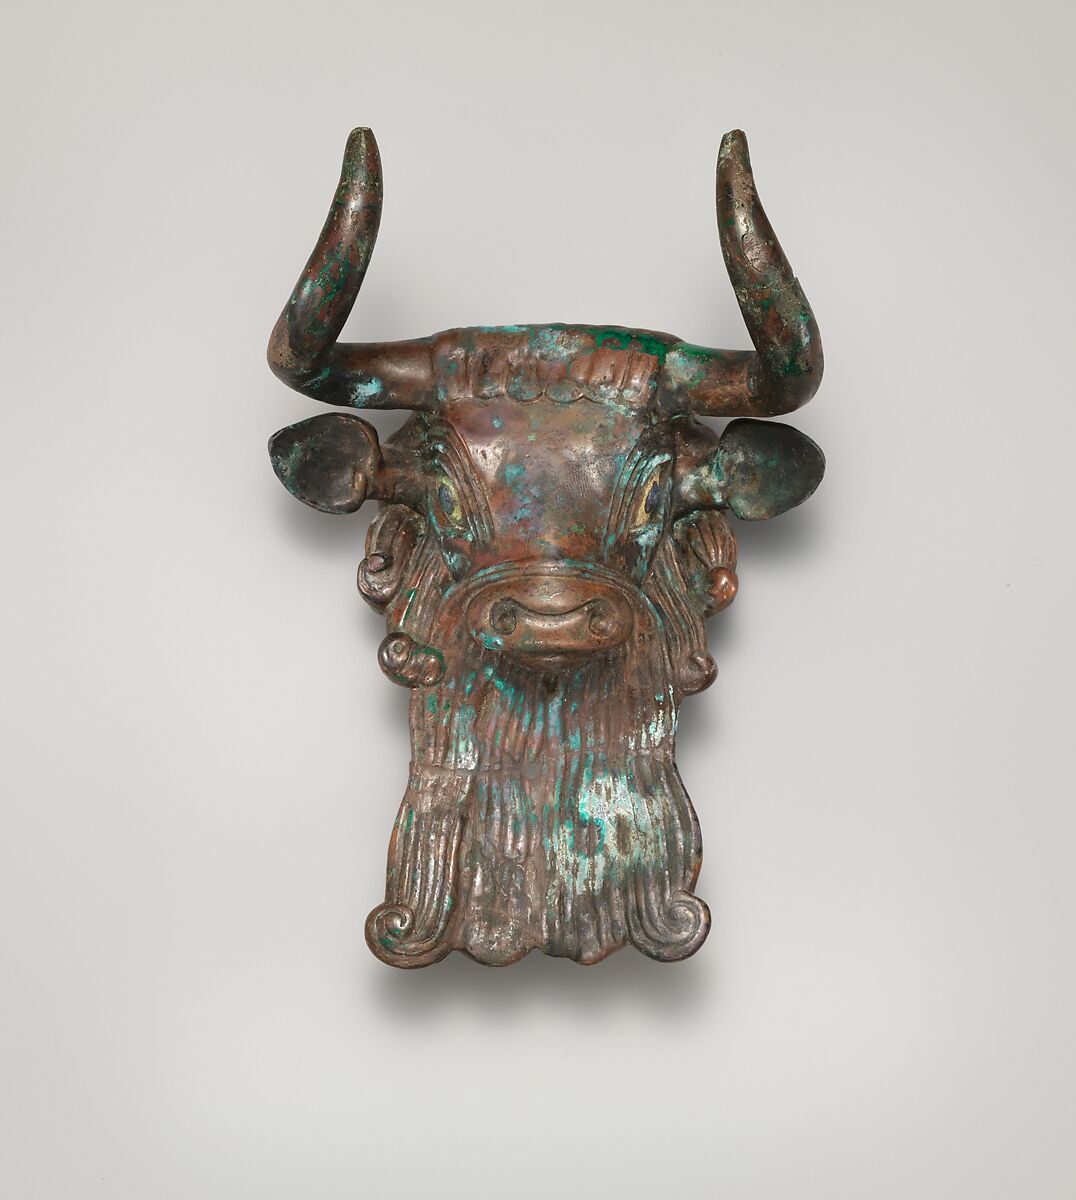 Bull's head ornament for a lyre, Bronze, inlaid with shell and lapis lazuli, Sumerian 